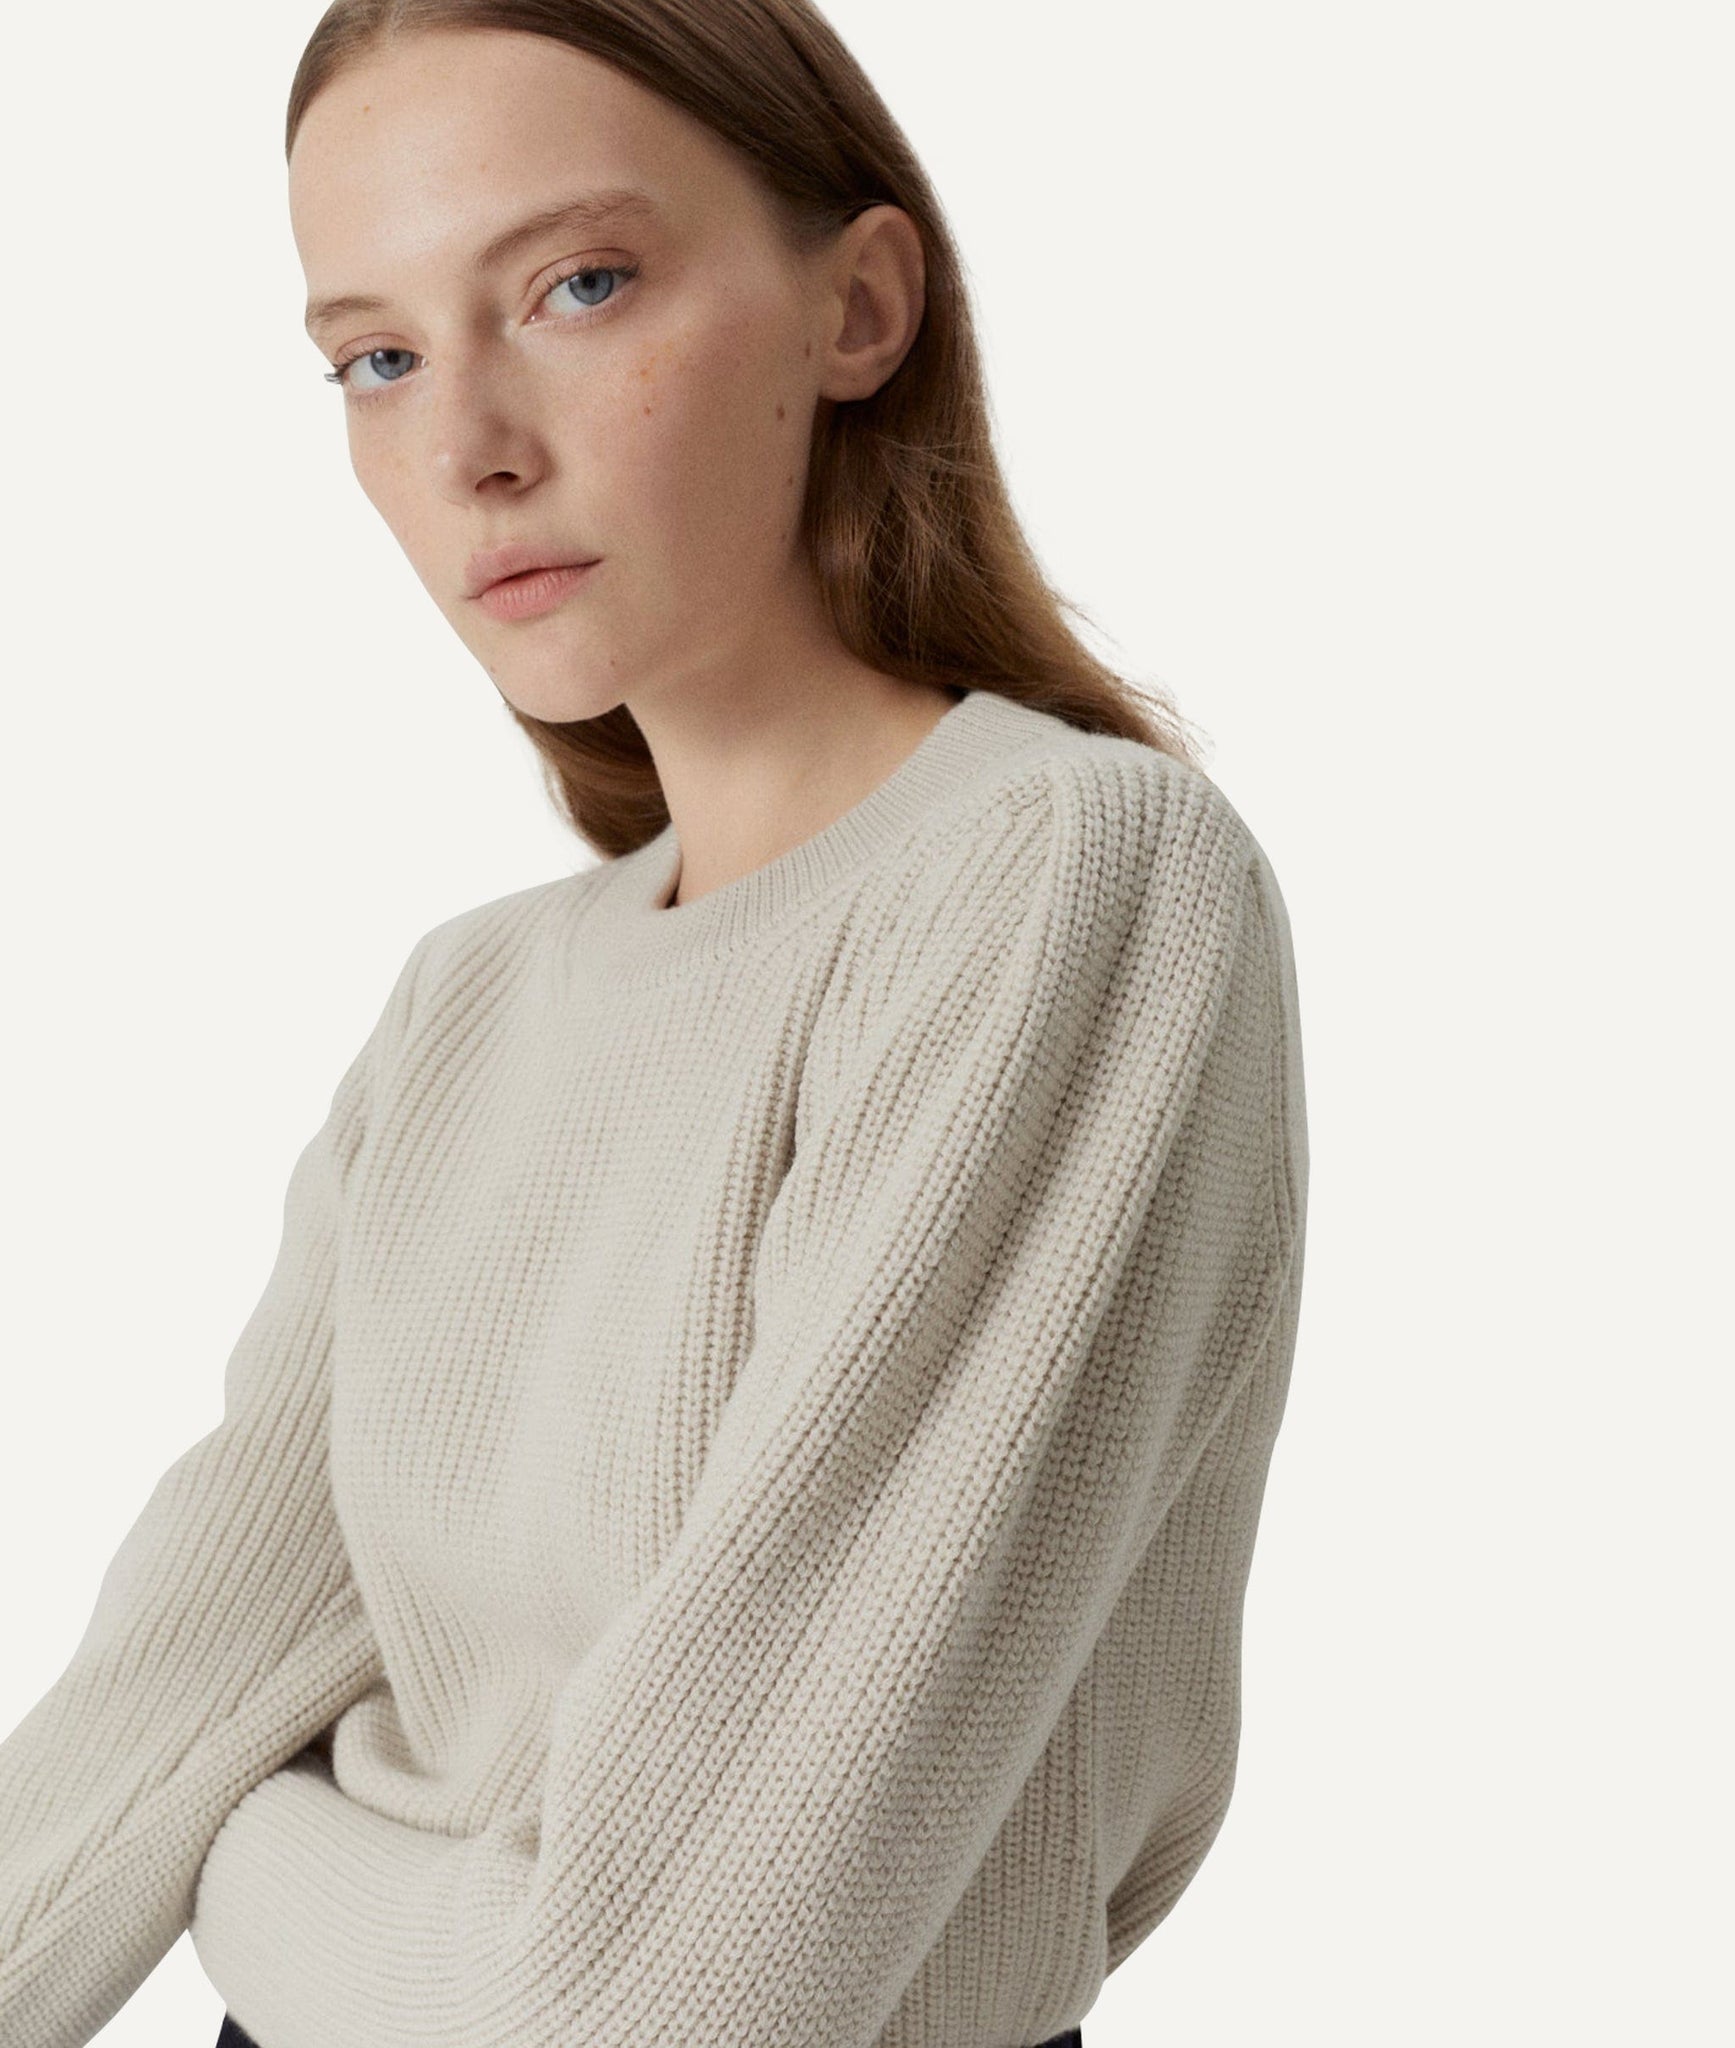 The Merino Wool Sweater with pinces